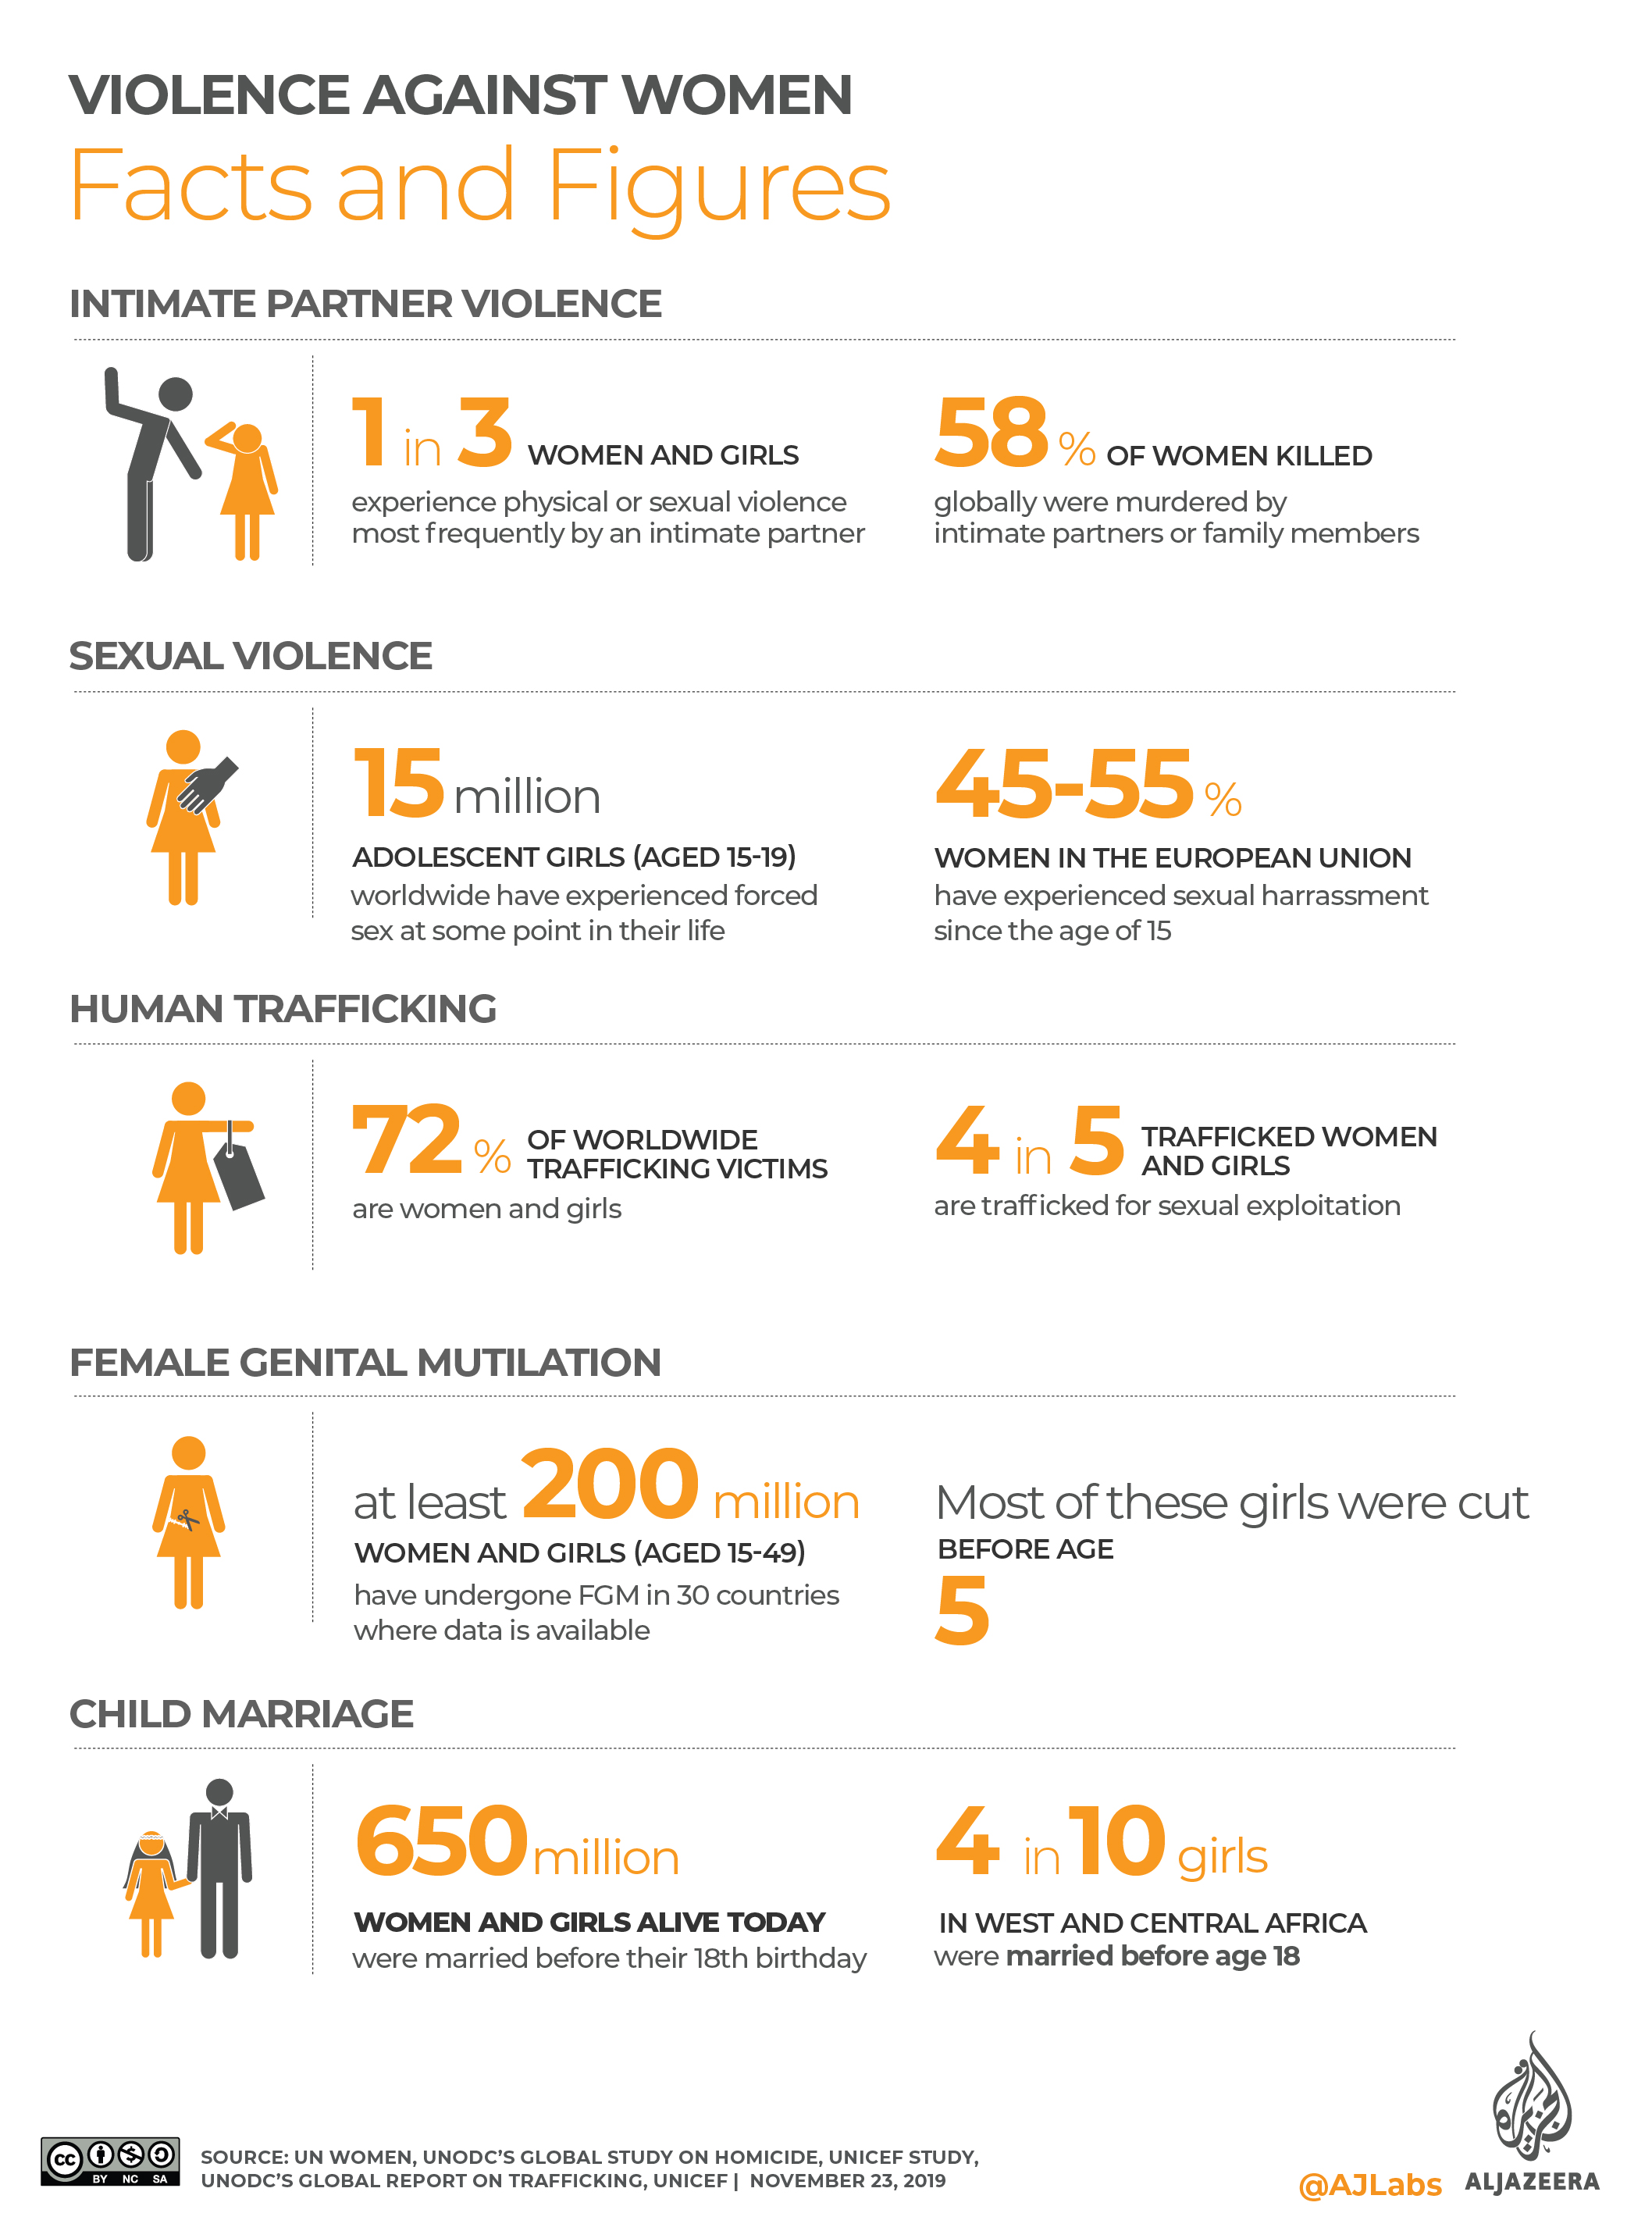 INTERACTIVE: Violence against women